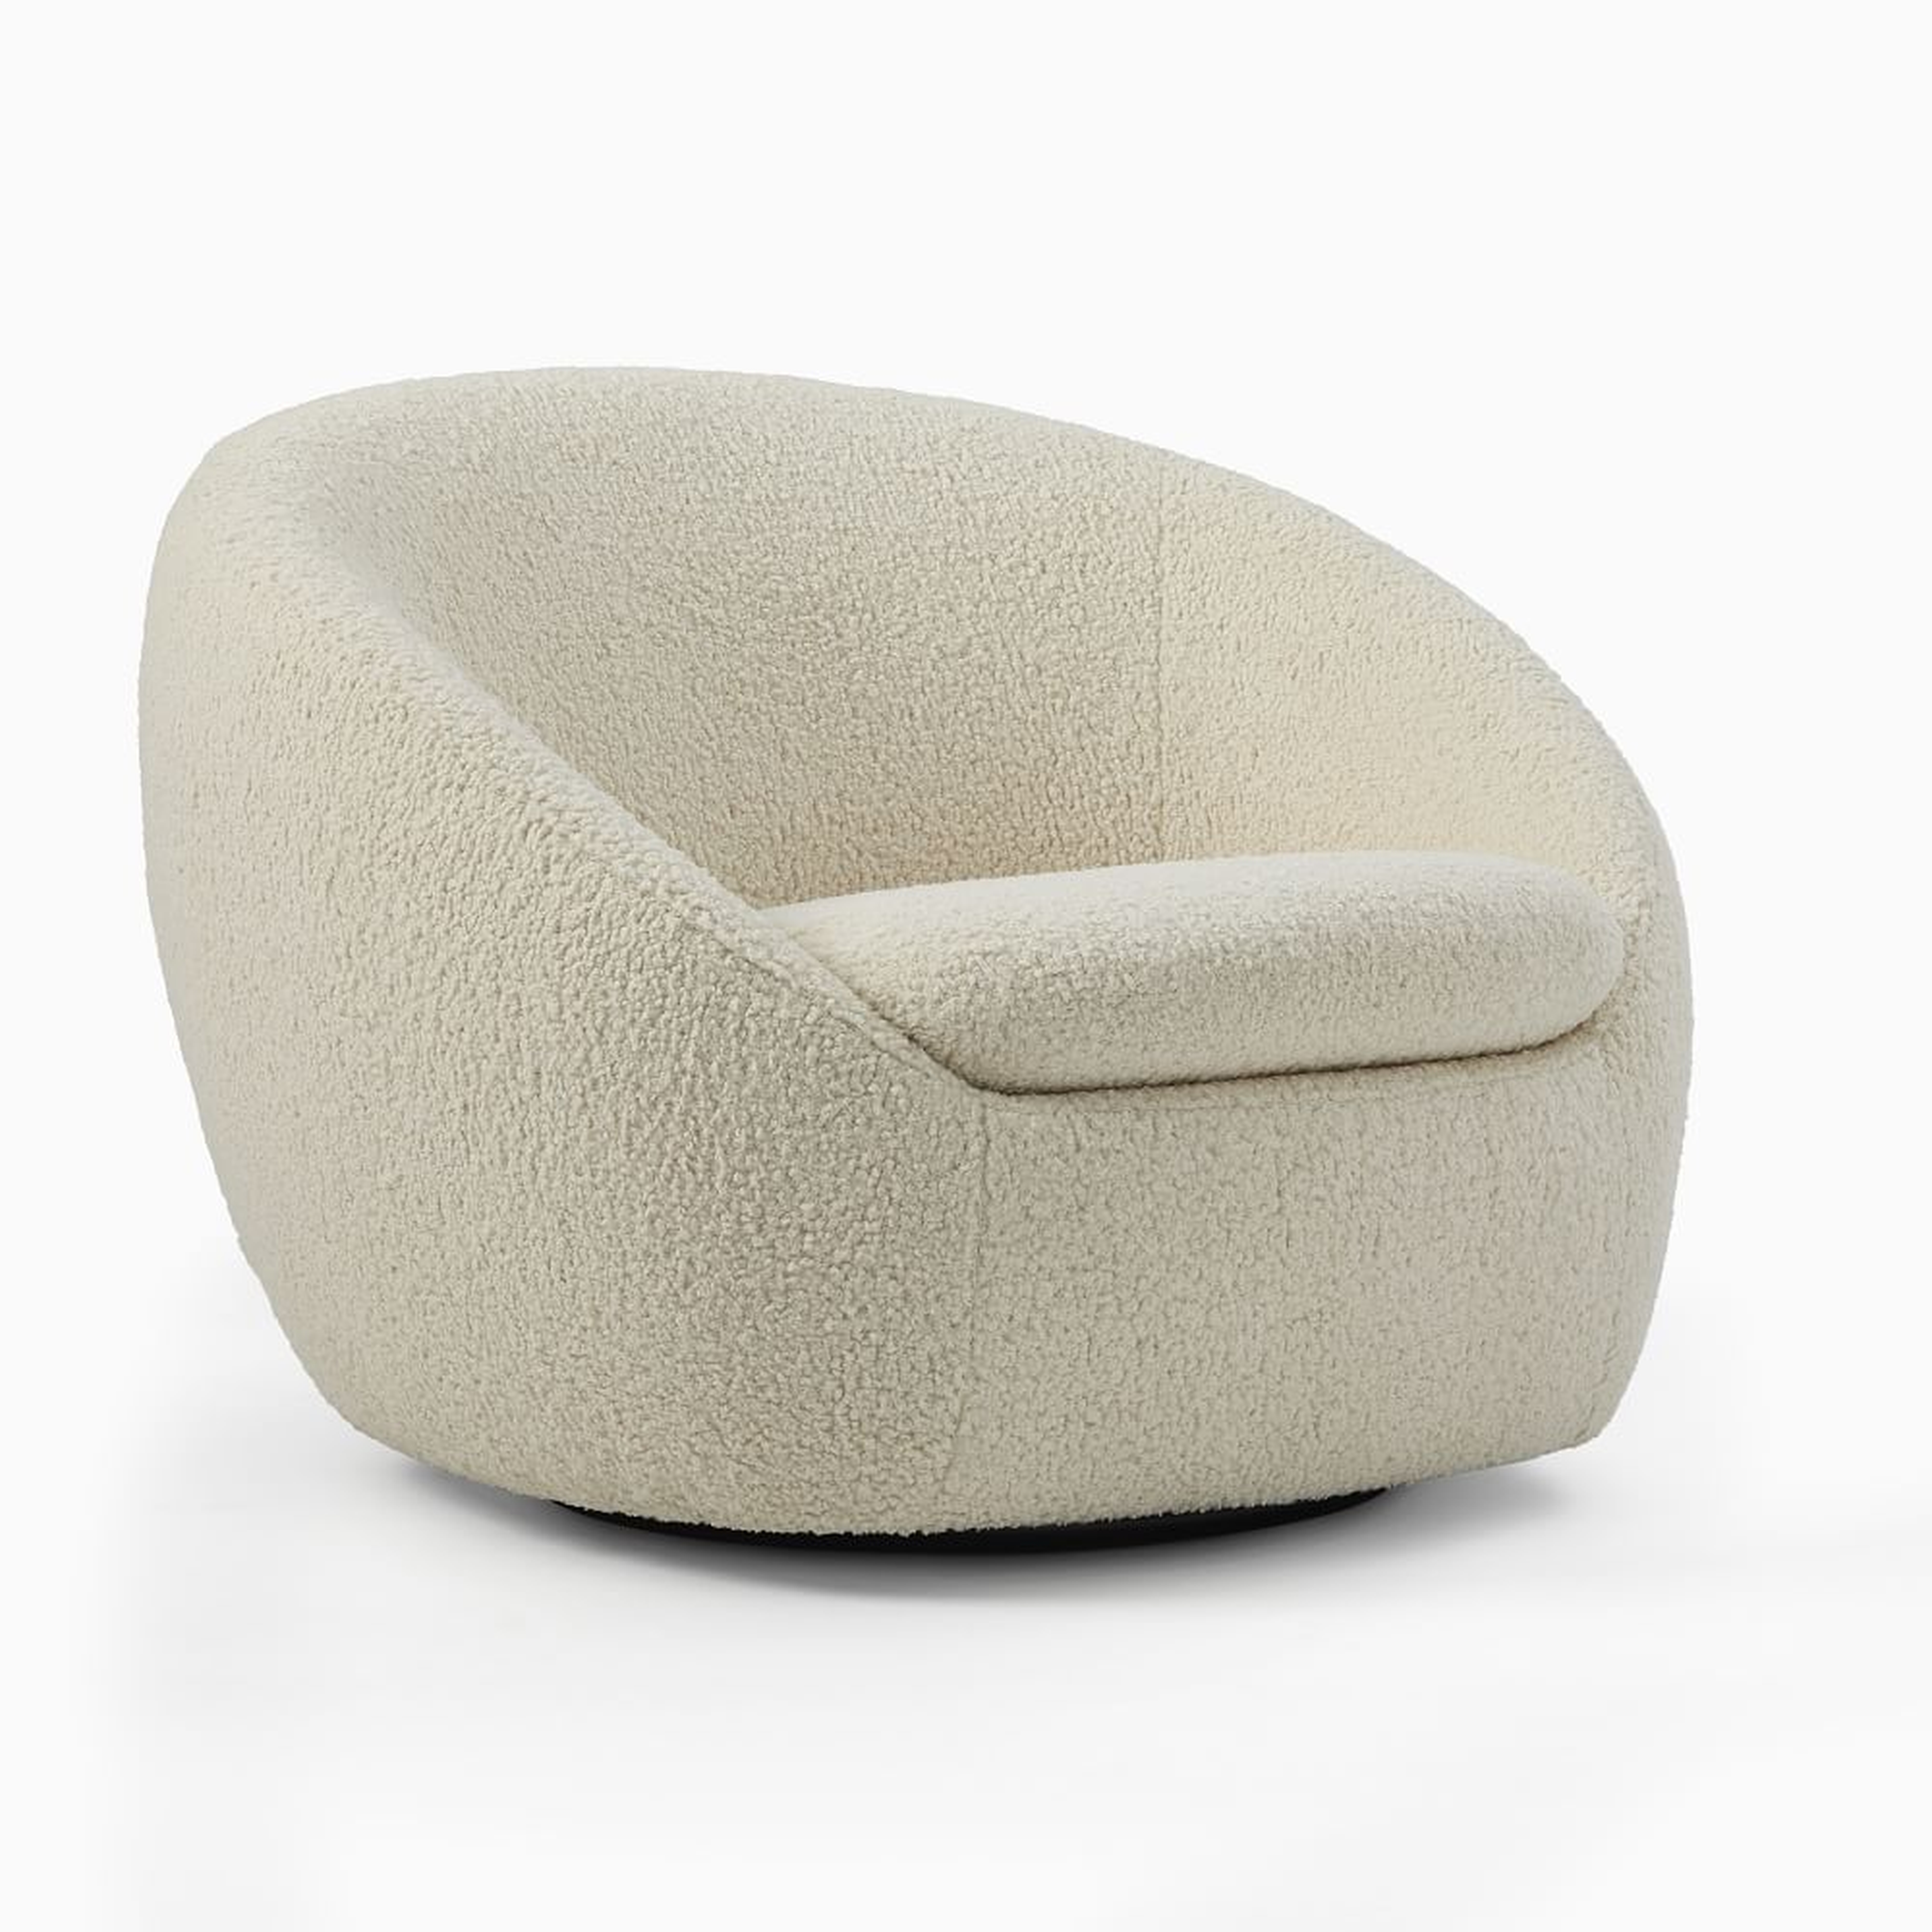 Cozy Swivel, Cozy Shearling, Ivory, Concealed Supports - West Elm